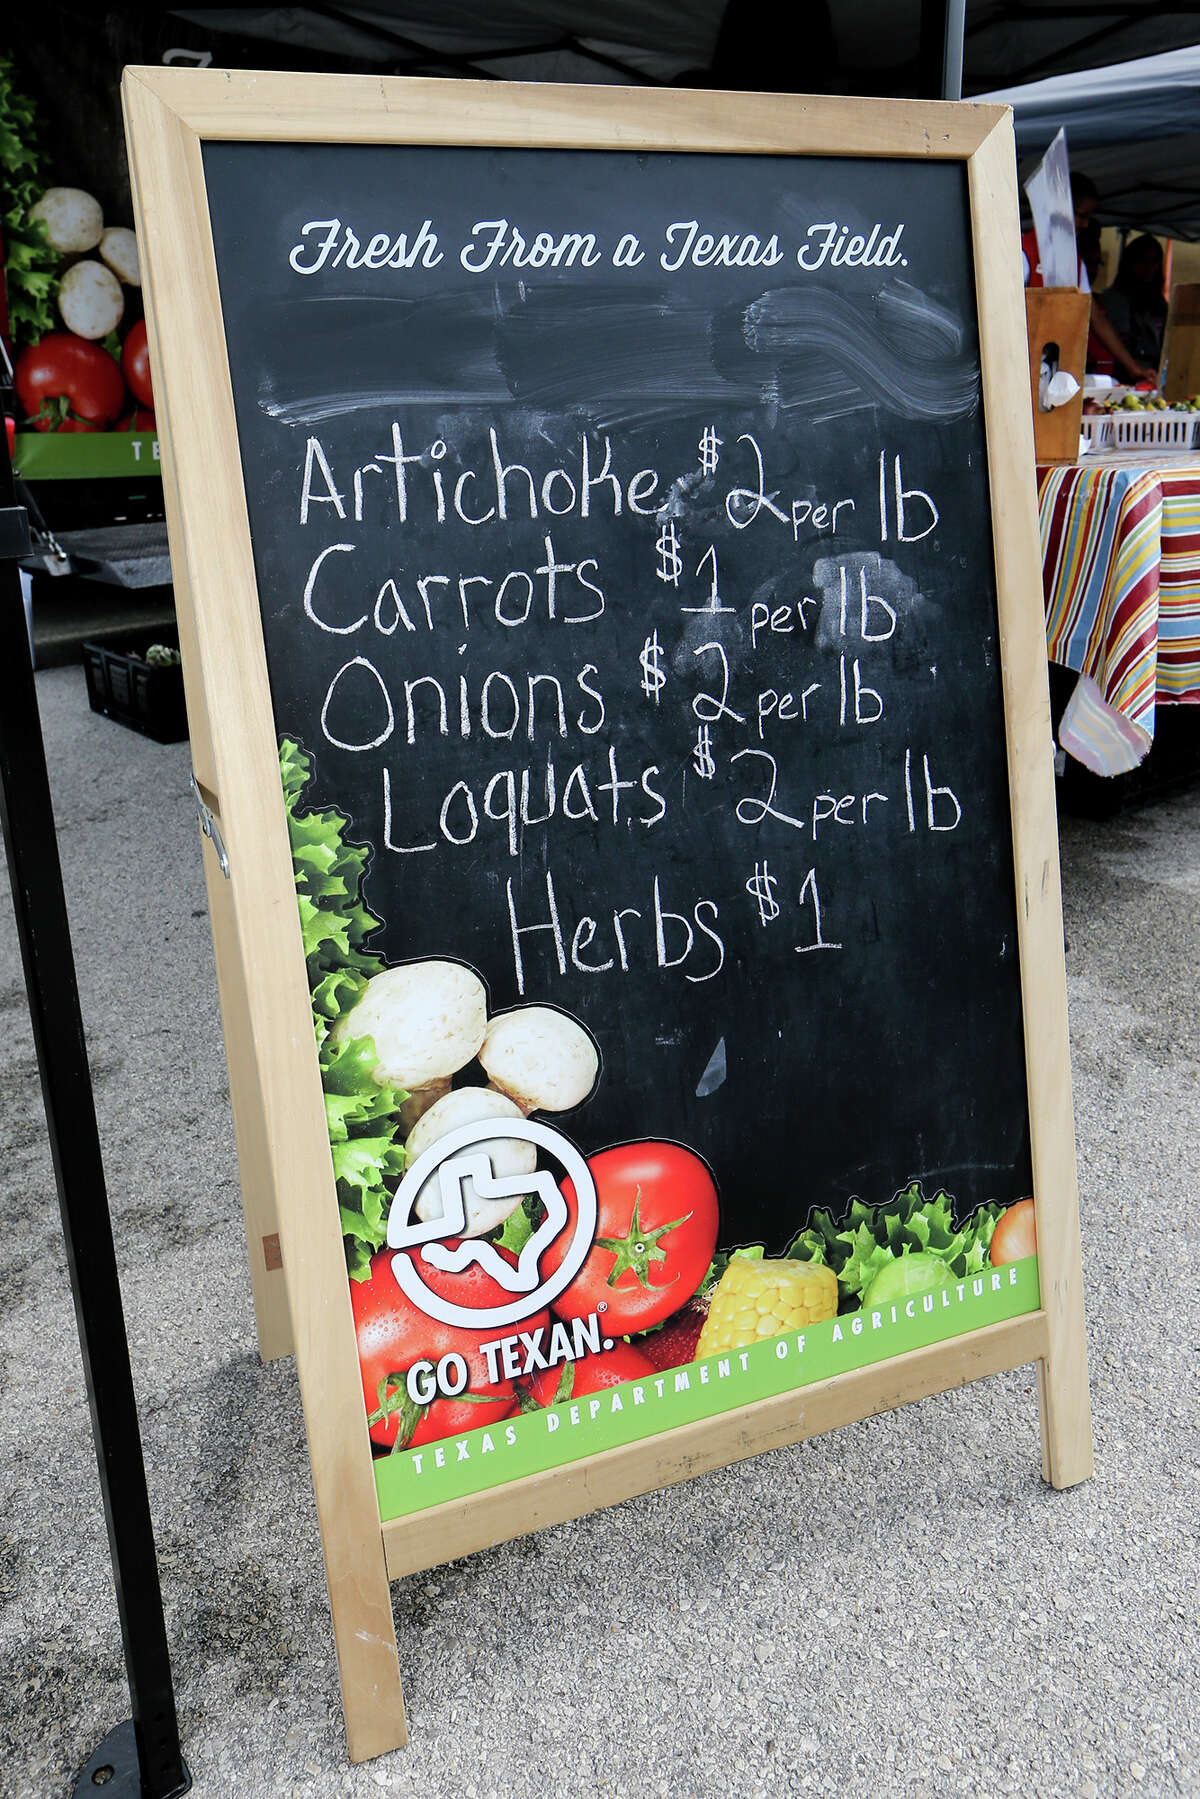 A sign advertises fruits, vegetables and herbs during the Sam Houston High School farmers market at the school on April 18, 2015.